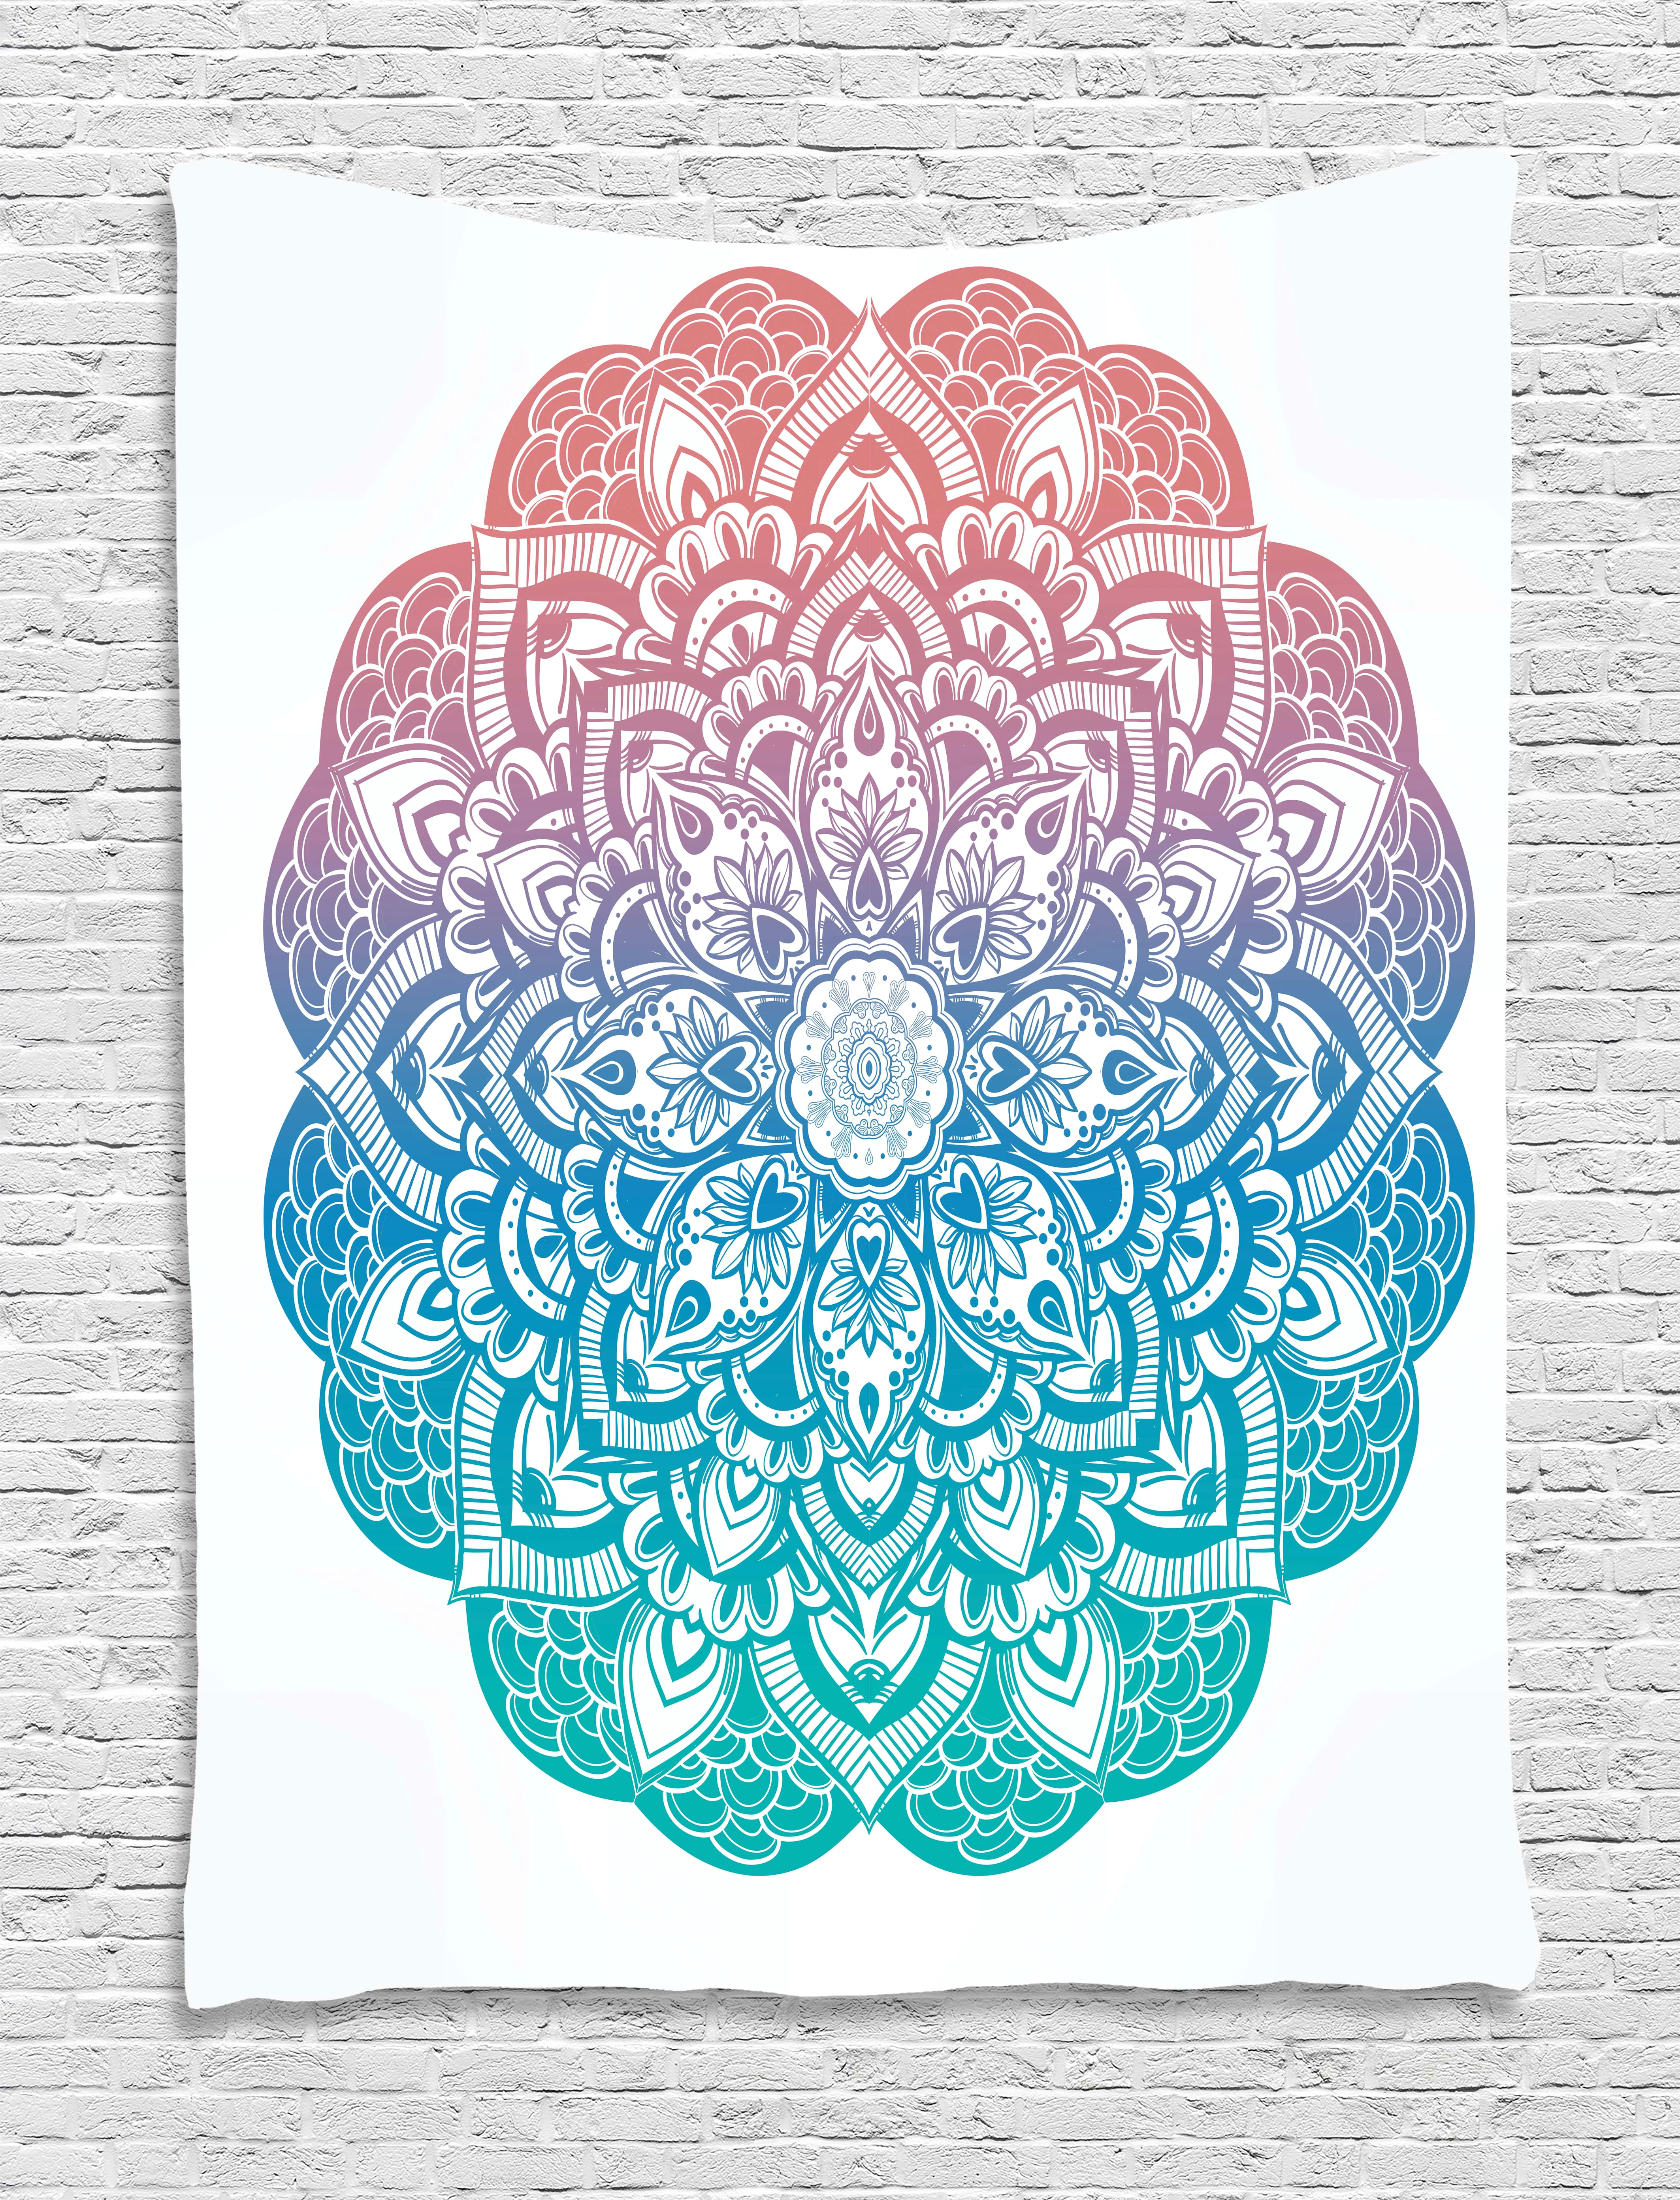 yoga tapestry boho gypsy mandala in pastel colors mystic floral meditation symbol wall hanging for bedroom living room dorm decor 60w x 80l inches